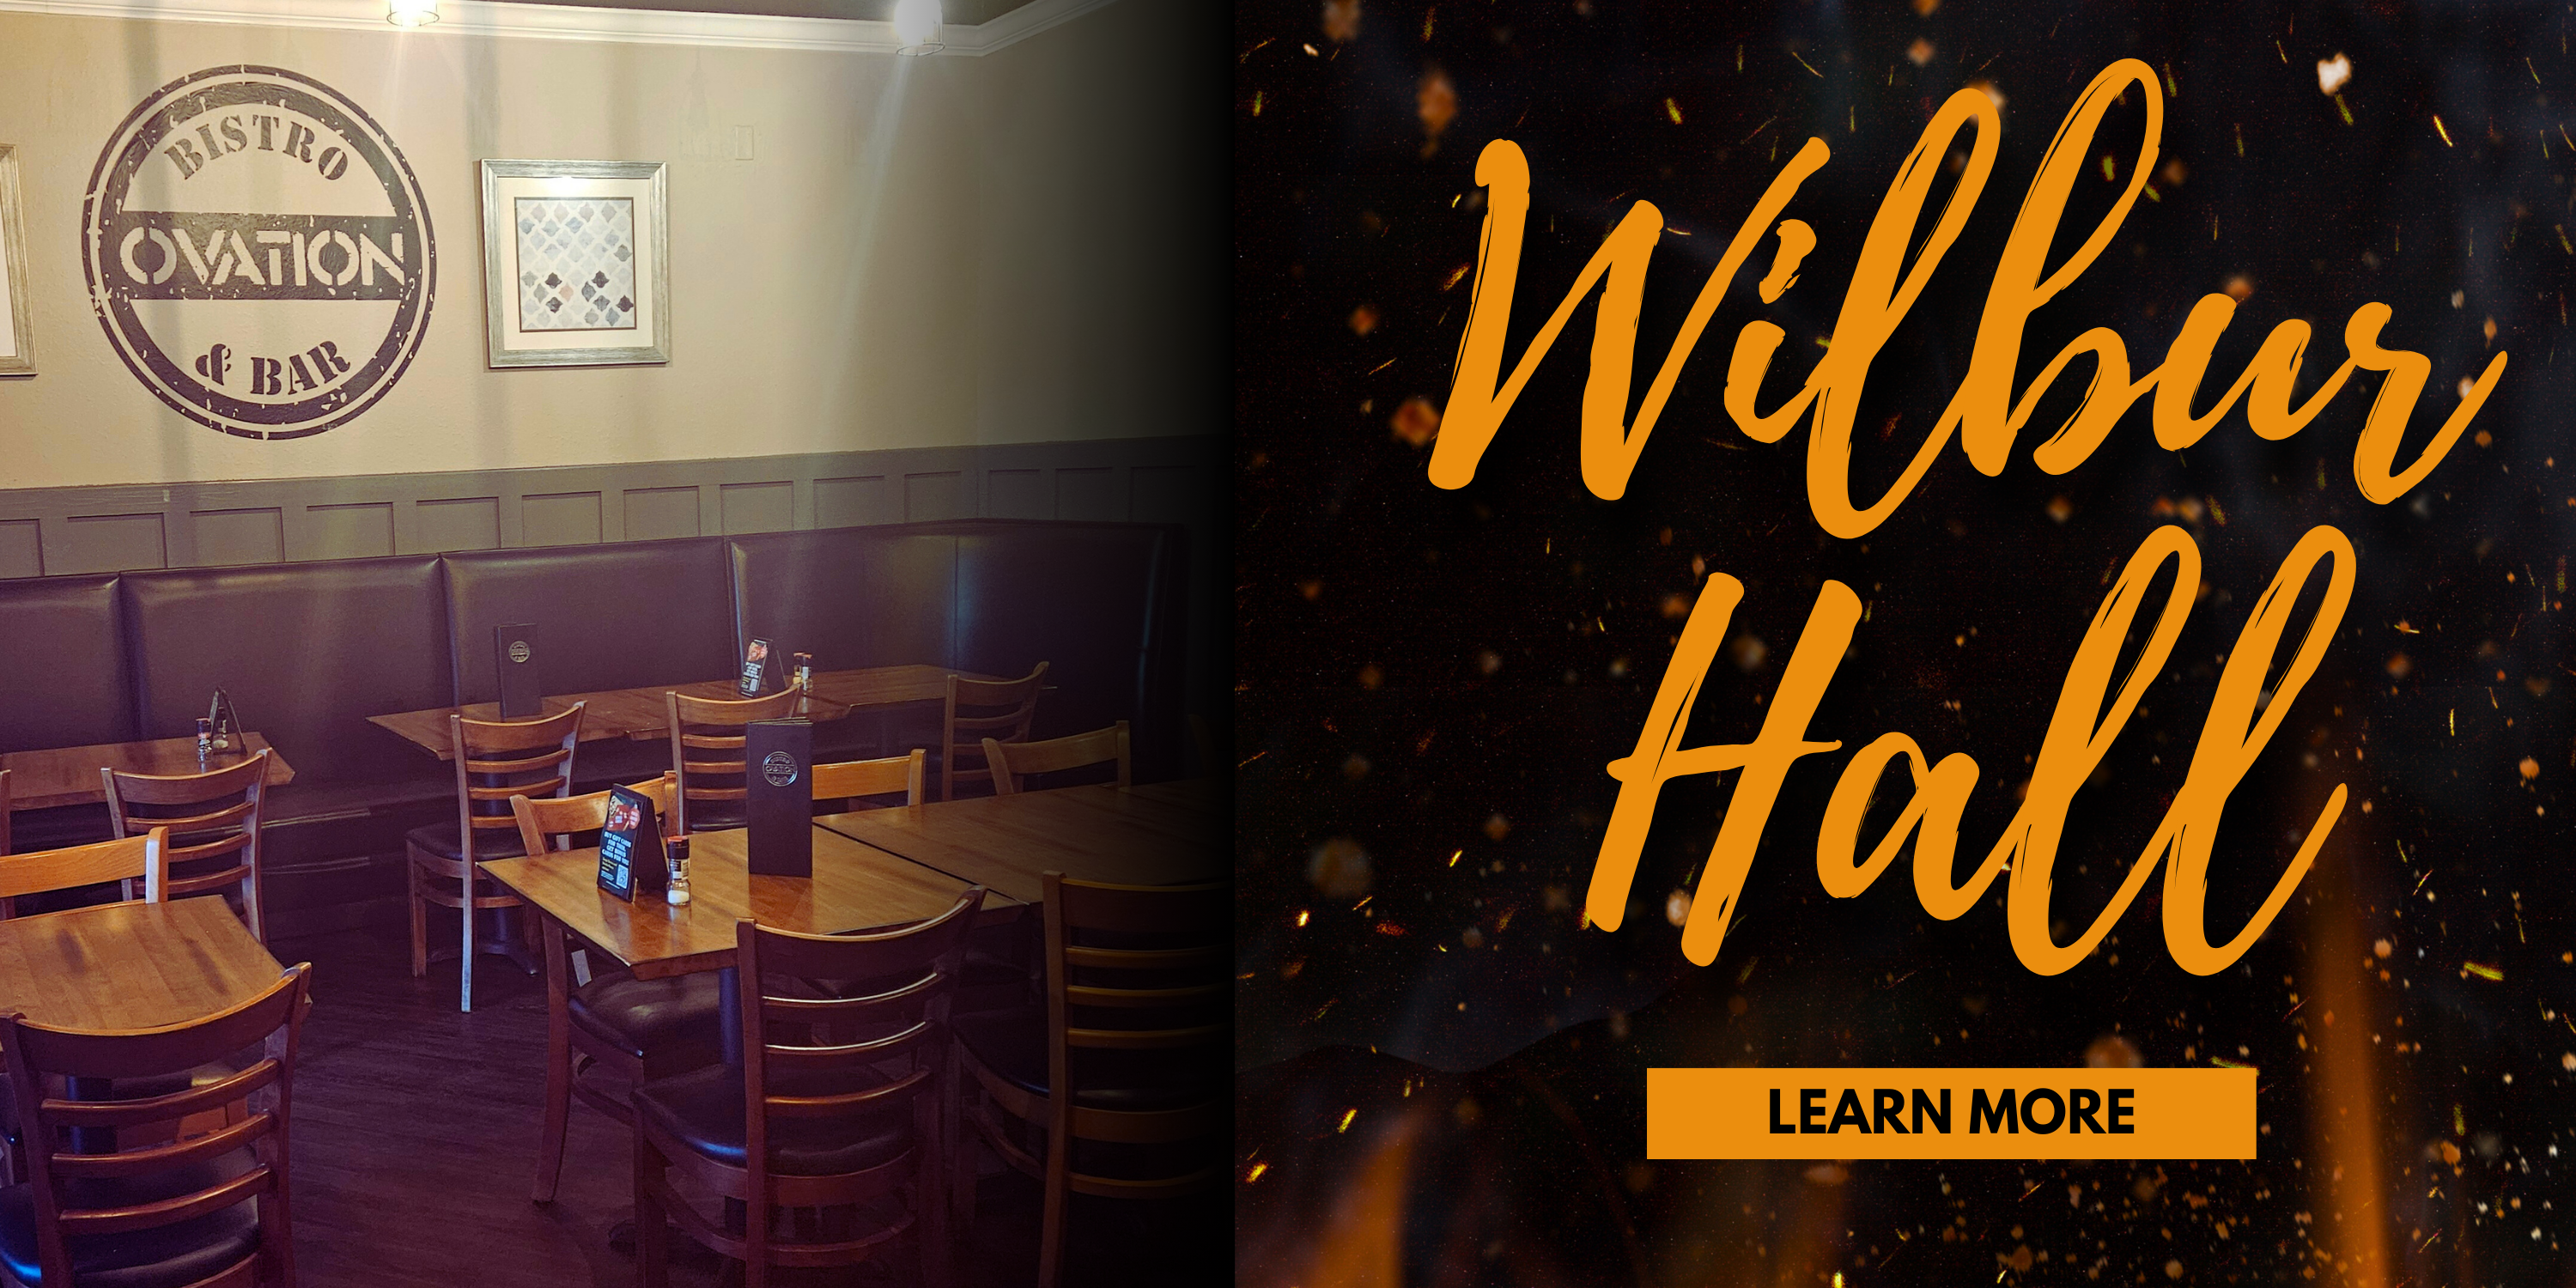 An inside look at Wilbur Hall Ovation's private dining space